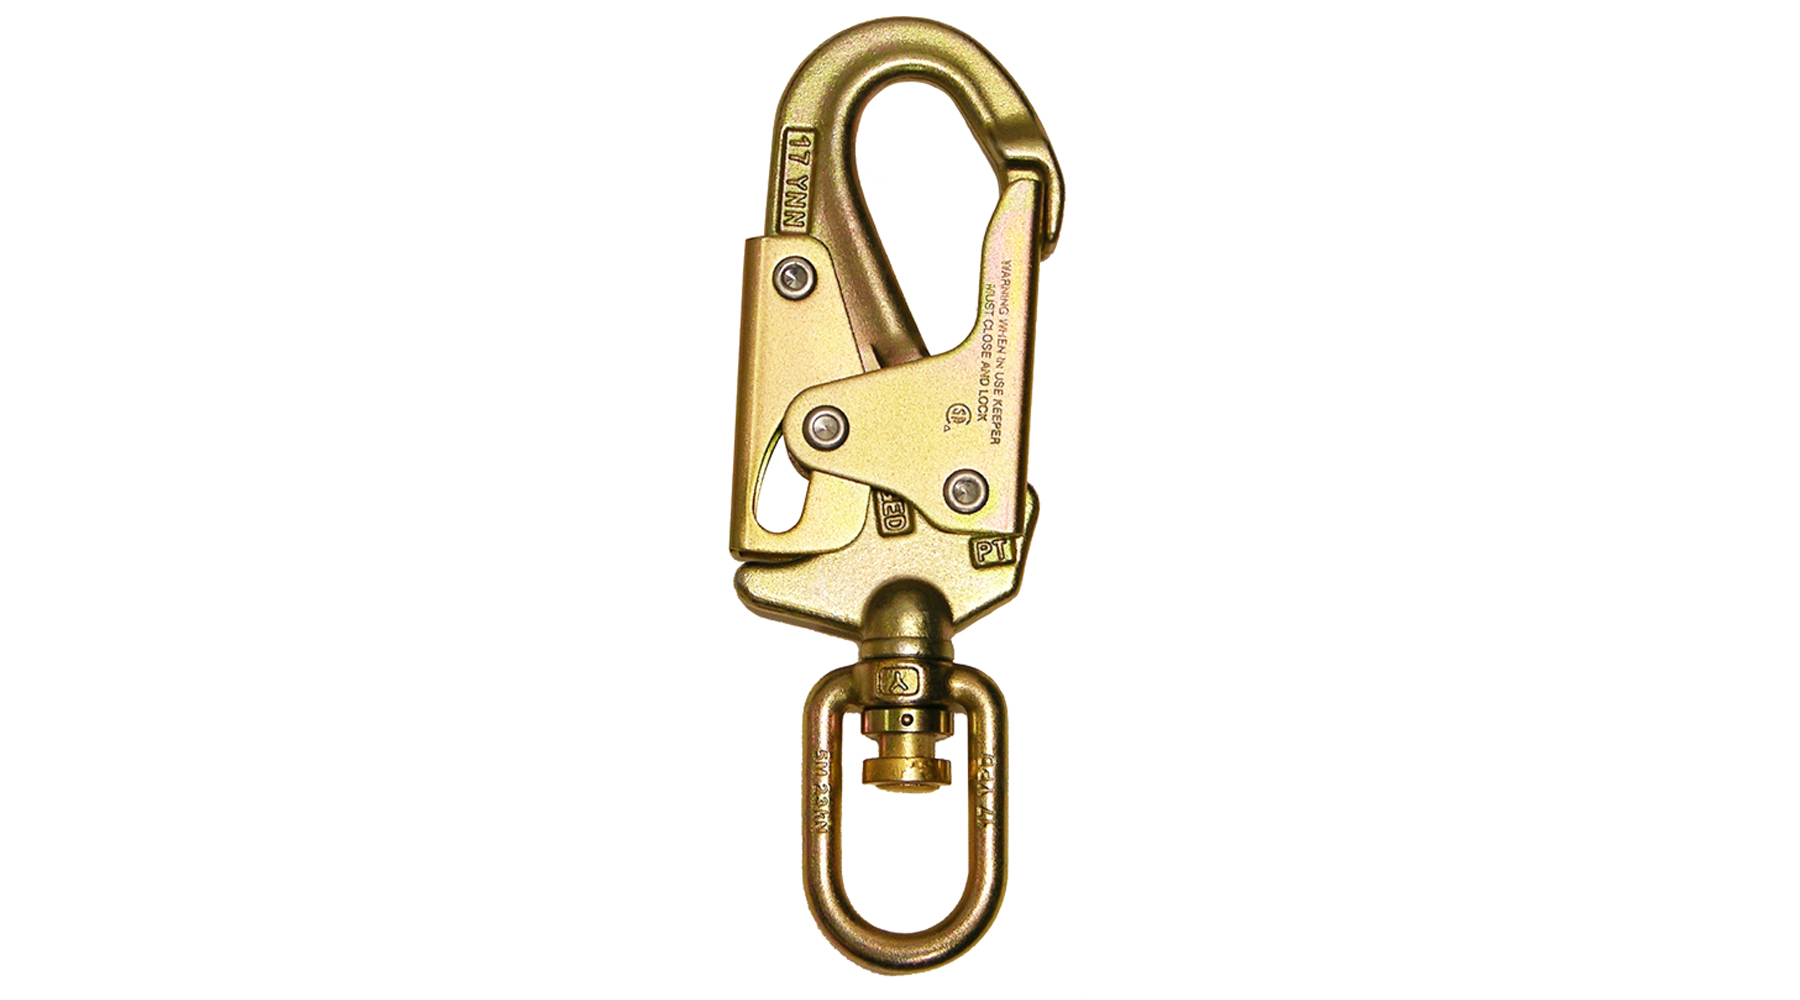 Double Locking Snap Hook :: Products :: Slingco